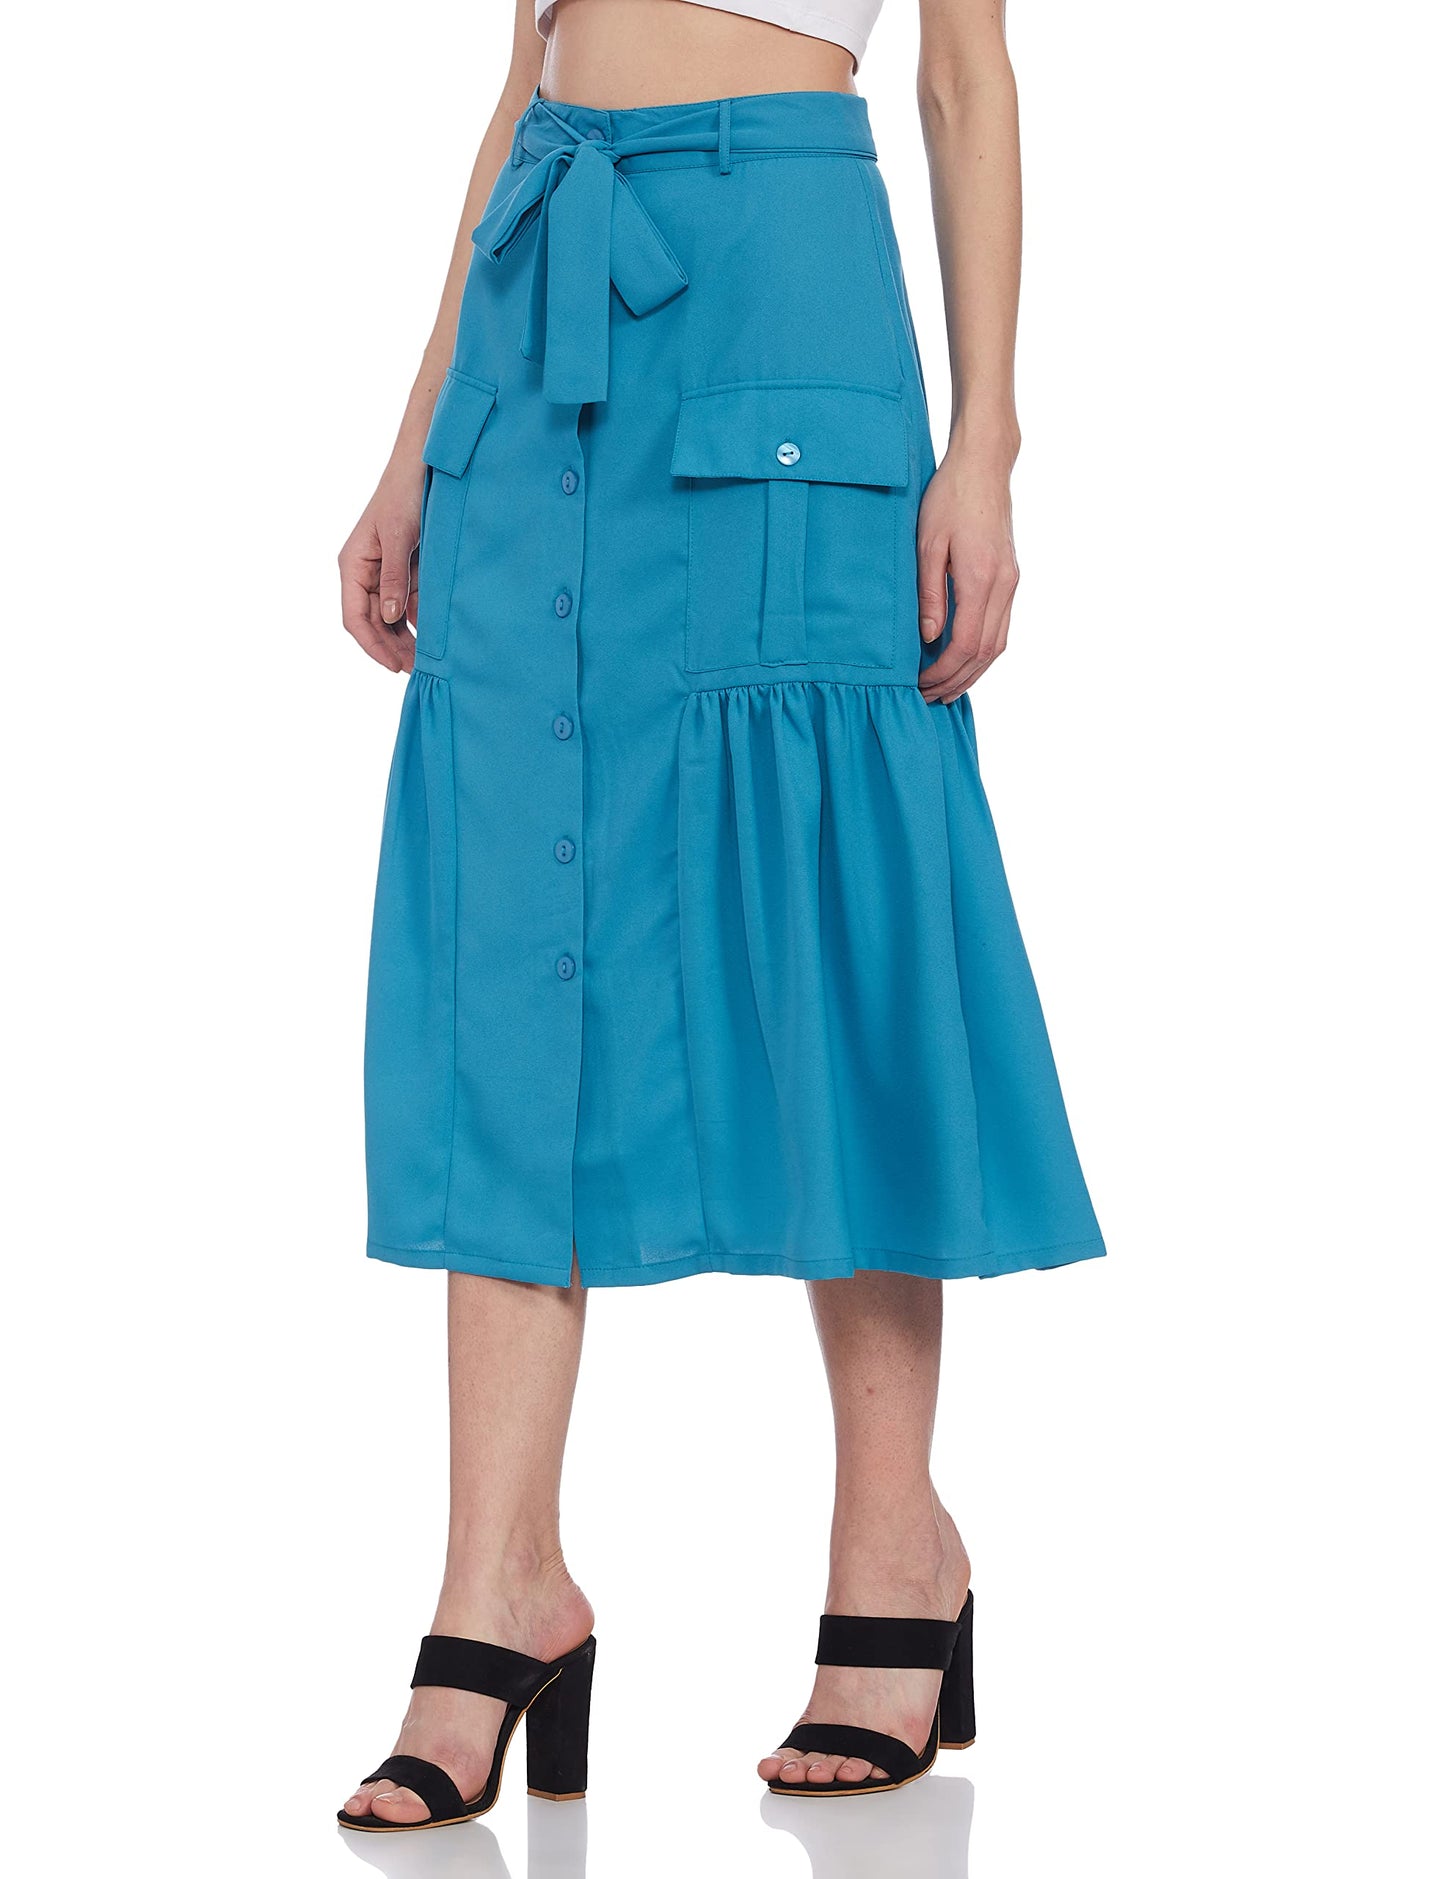 Marie Claire Polyester Western Skirt (Aqua)